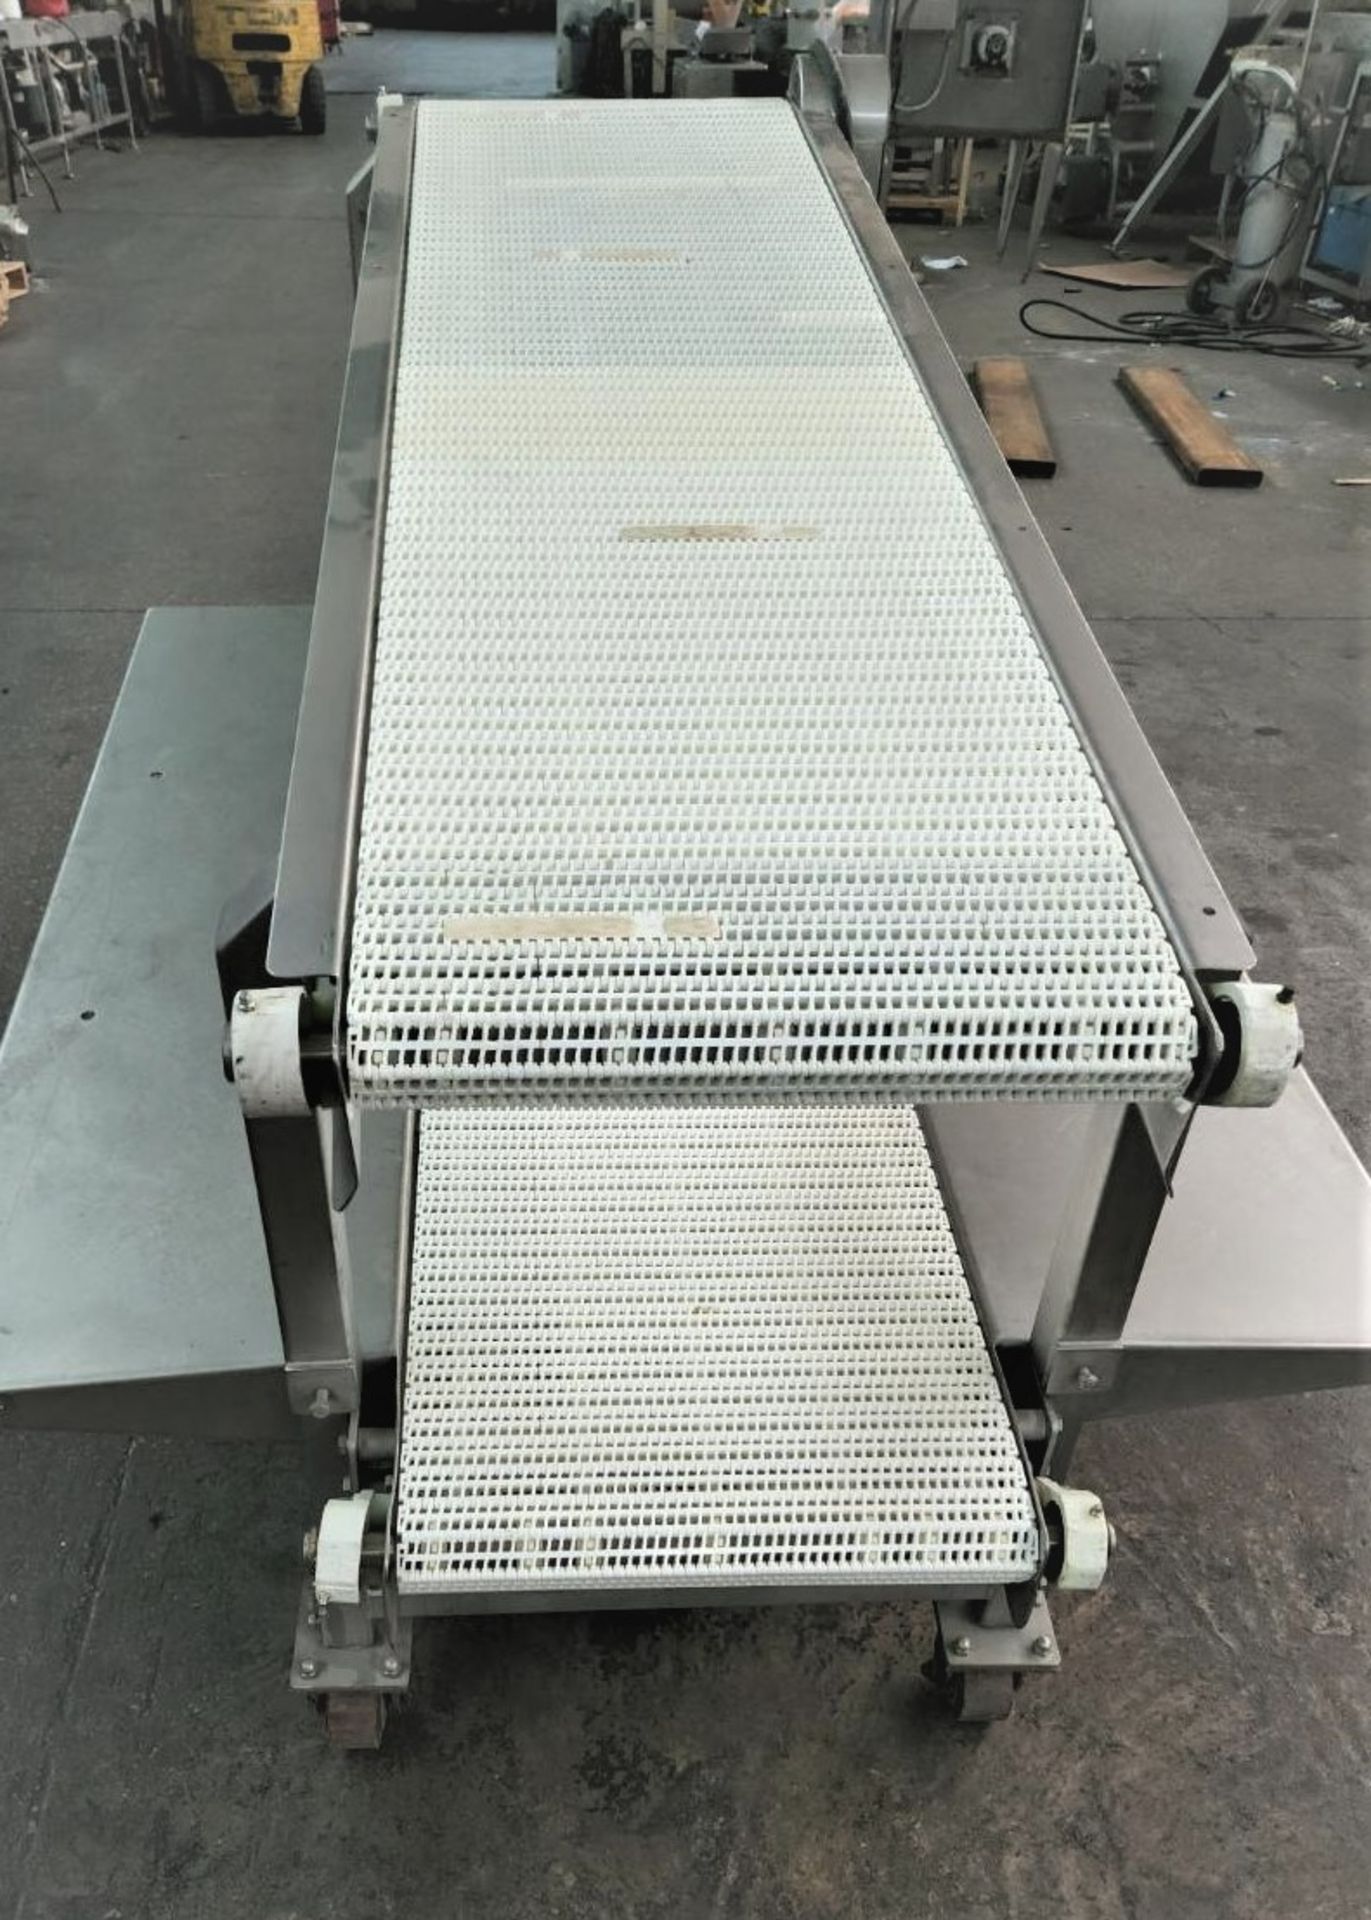 Dual Pack Off 18" S/S Sanitary Conveyor, Last Used in the food industry and remains in excellent - Image 3 of 5